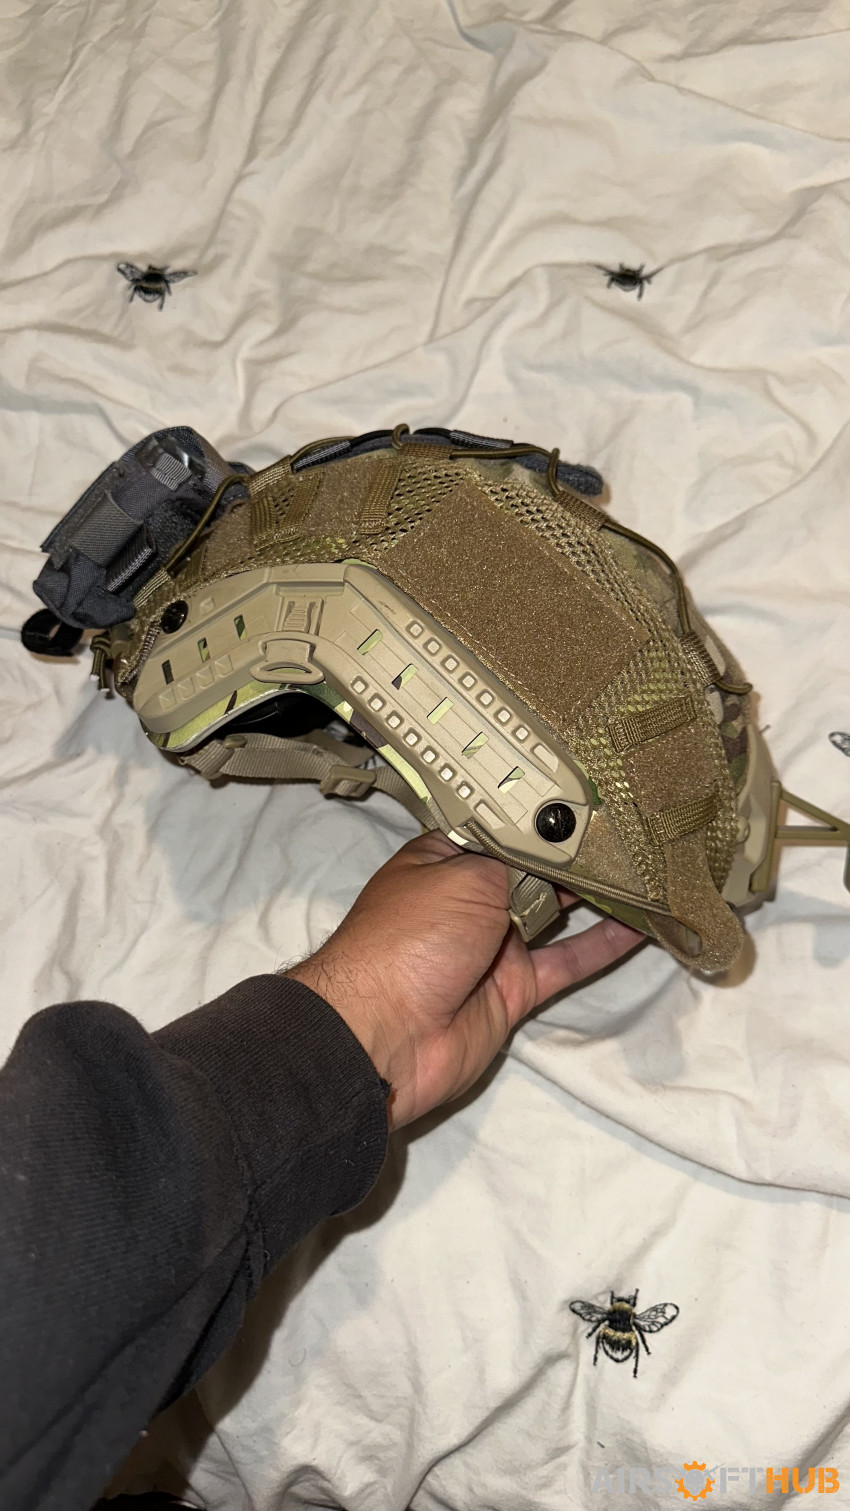 Helmet with MTP Cover - Used airsoft equipment